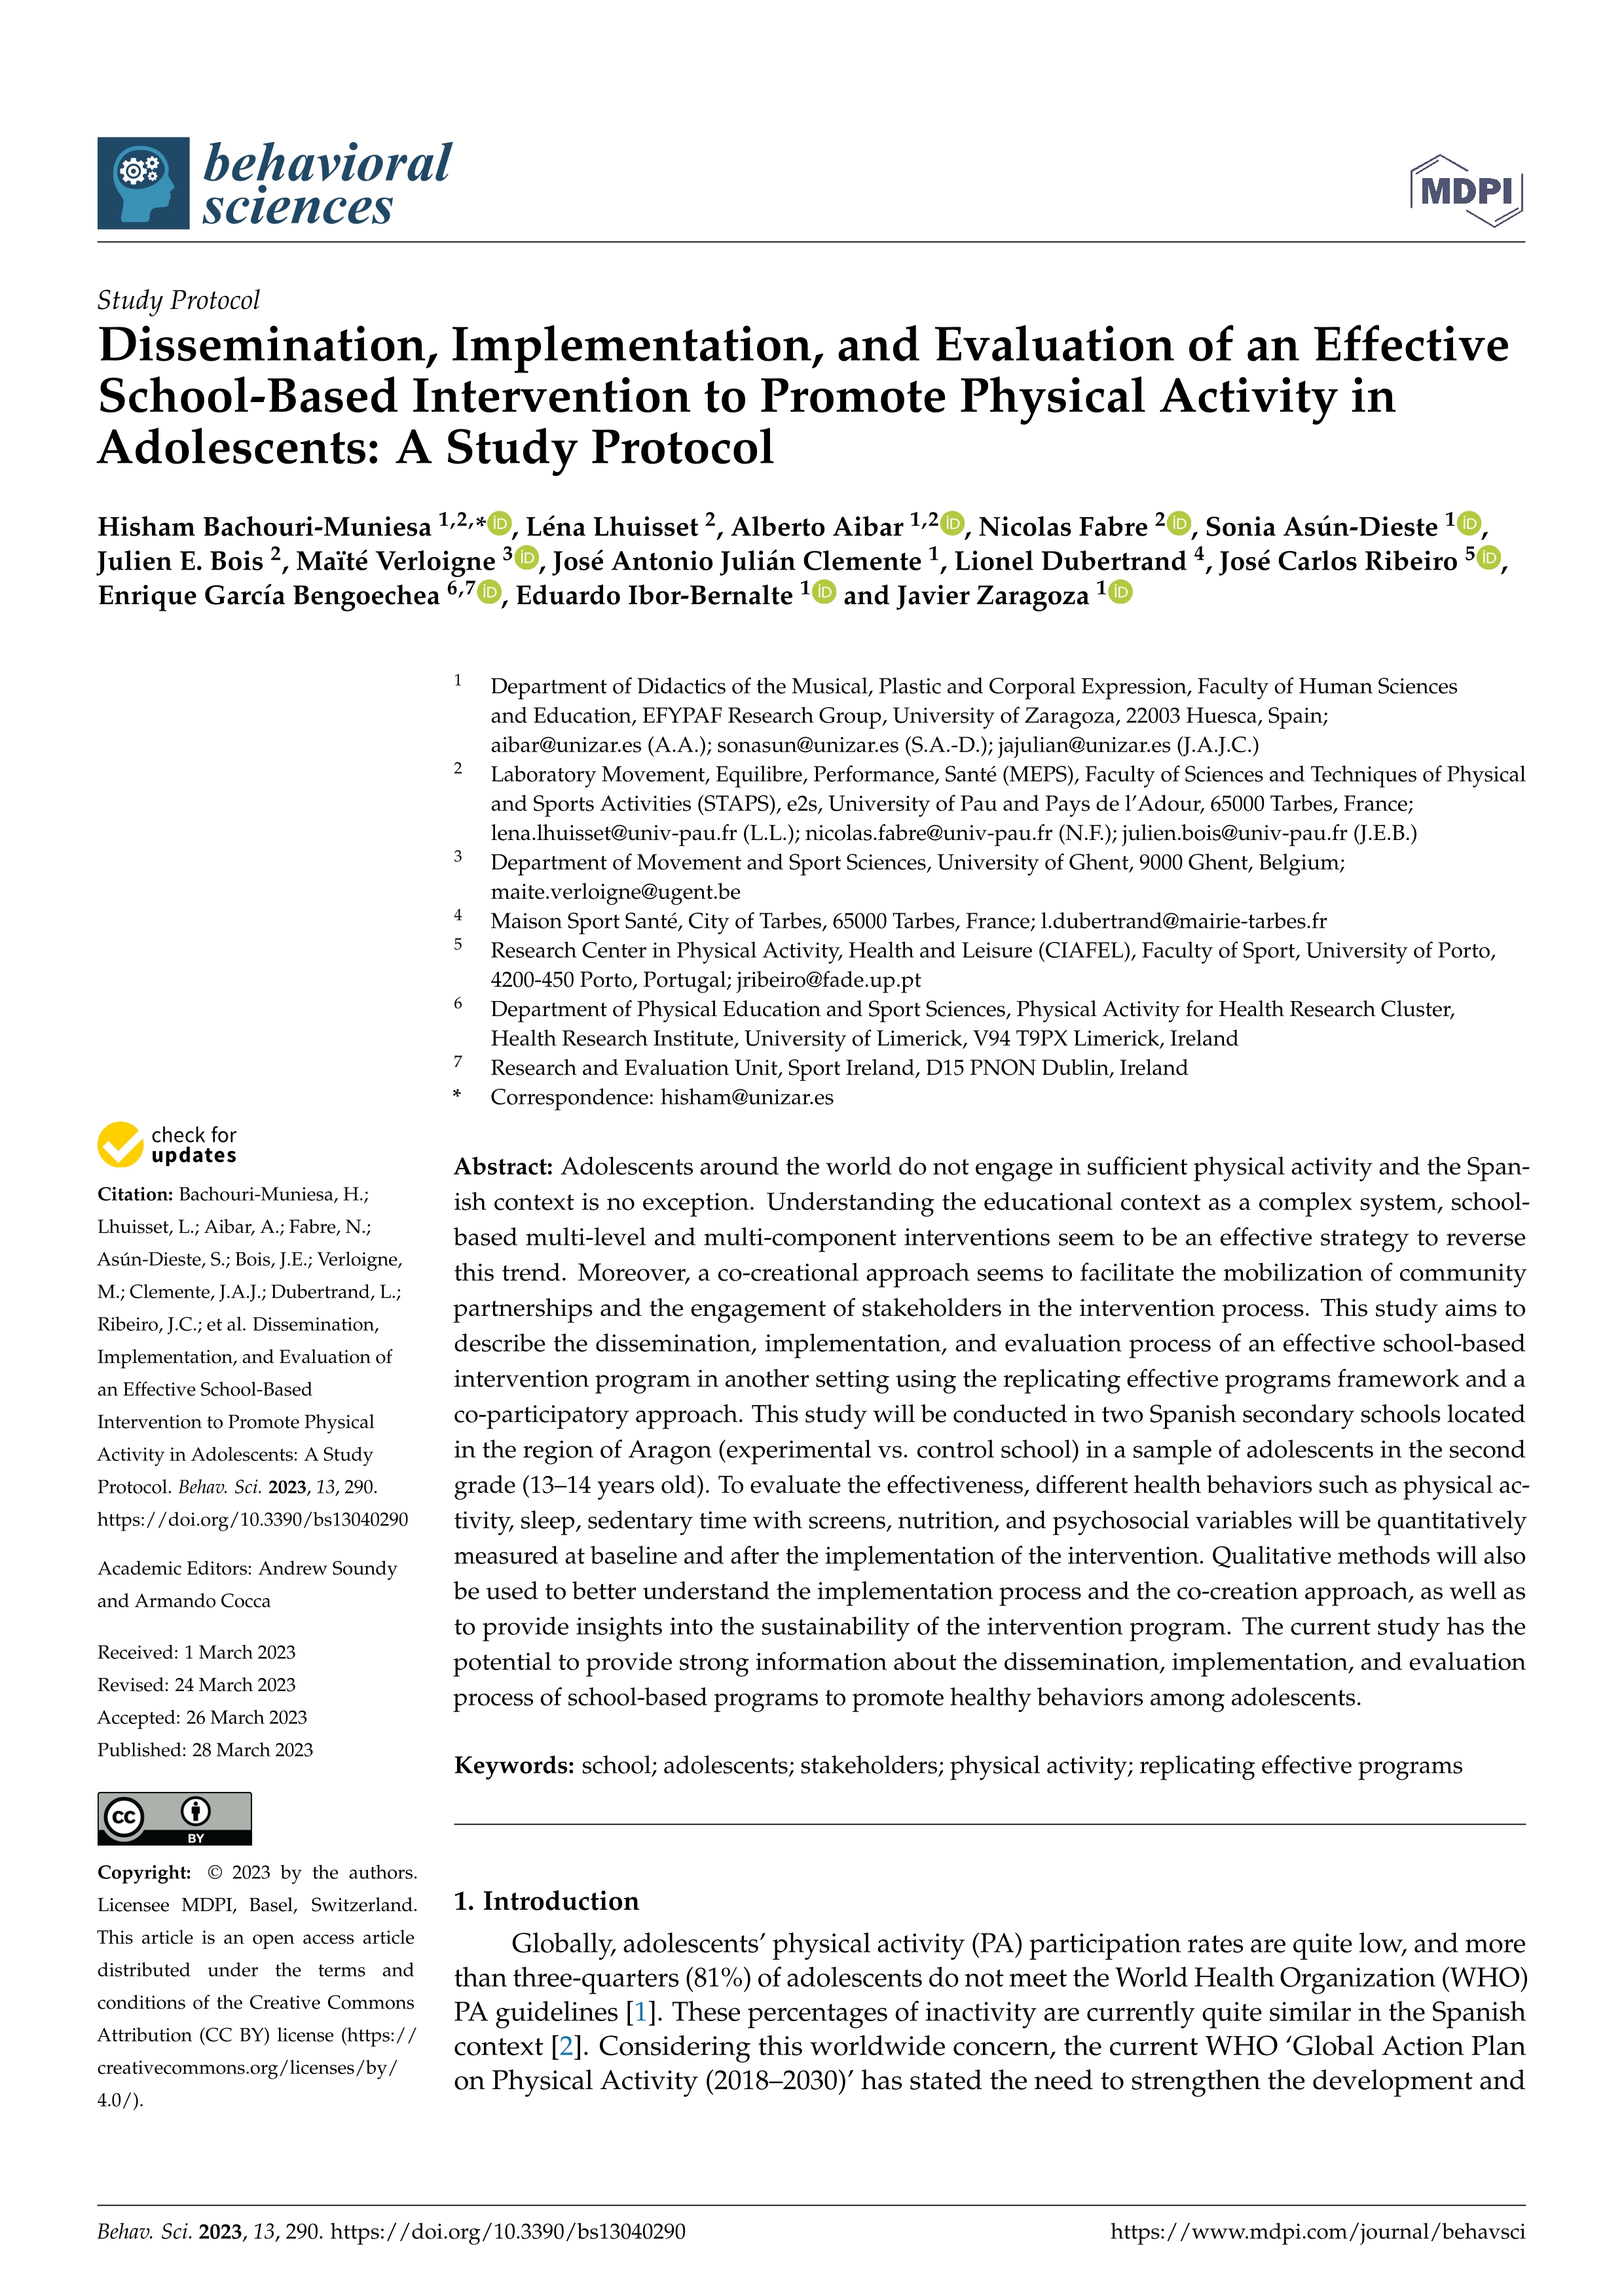 Dissemination, implementation, and evaluation of an effective school-based intervention to promote physical activity in adolescents: a study protocol